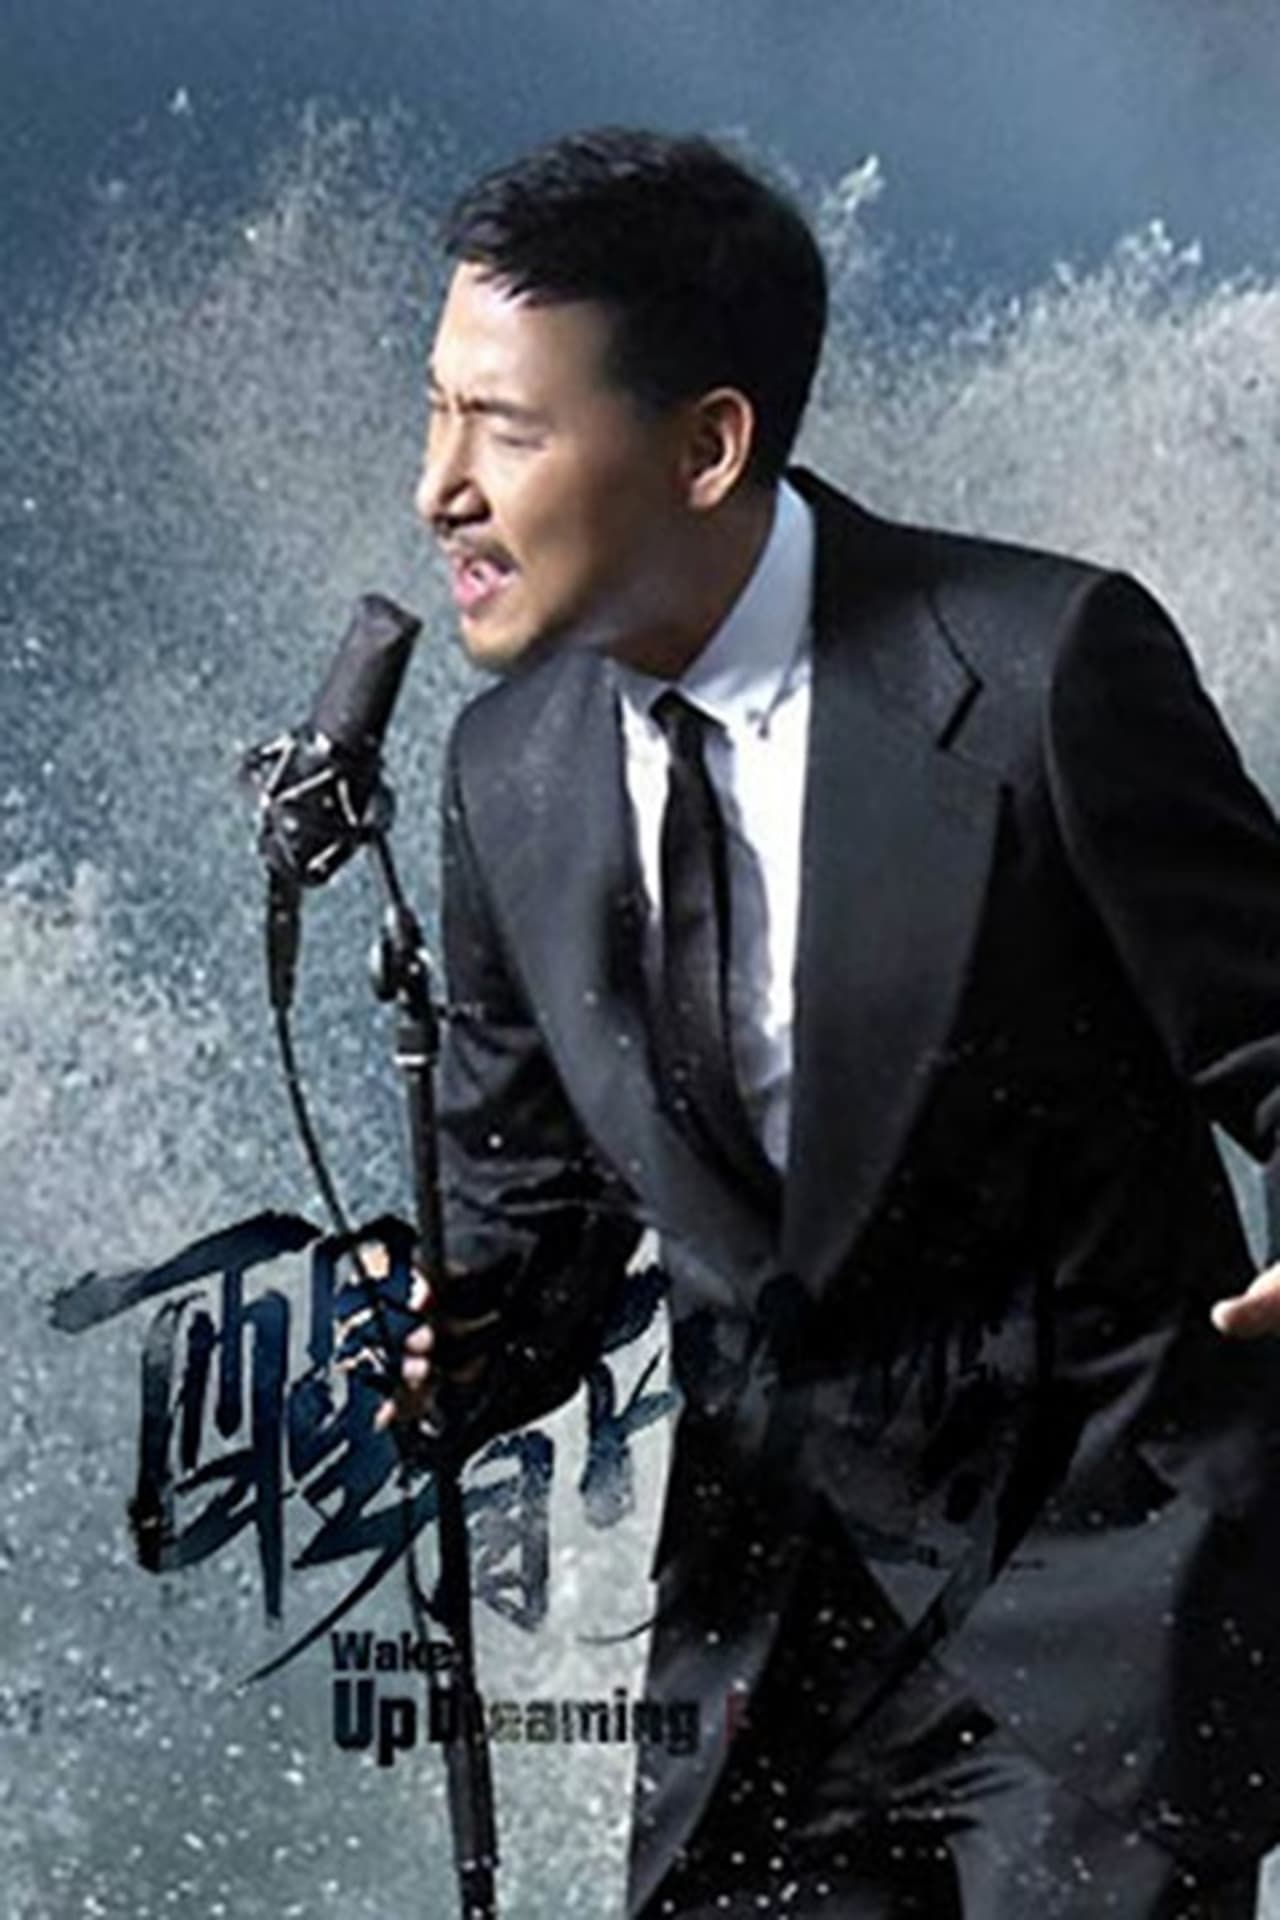 Jacky Cheung - Wake Up Dreaming Concert